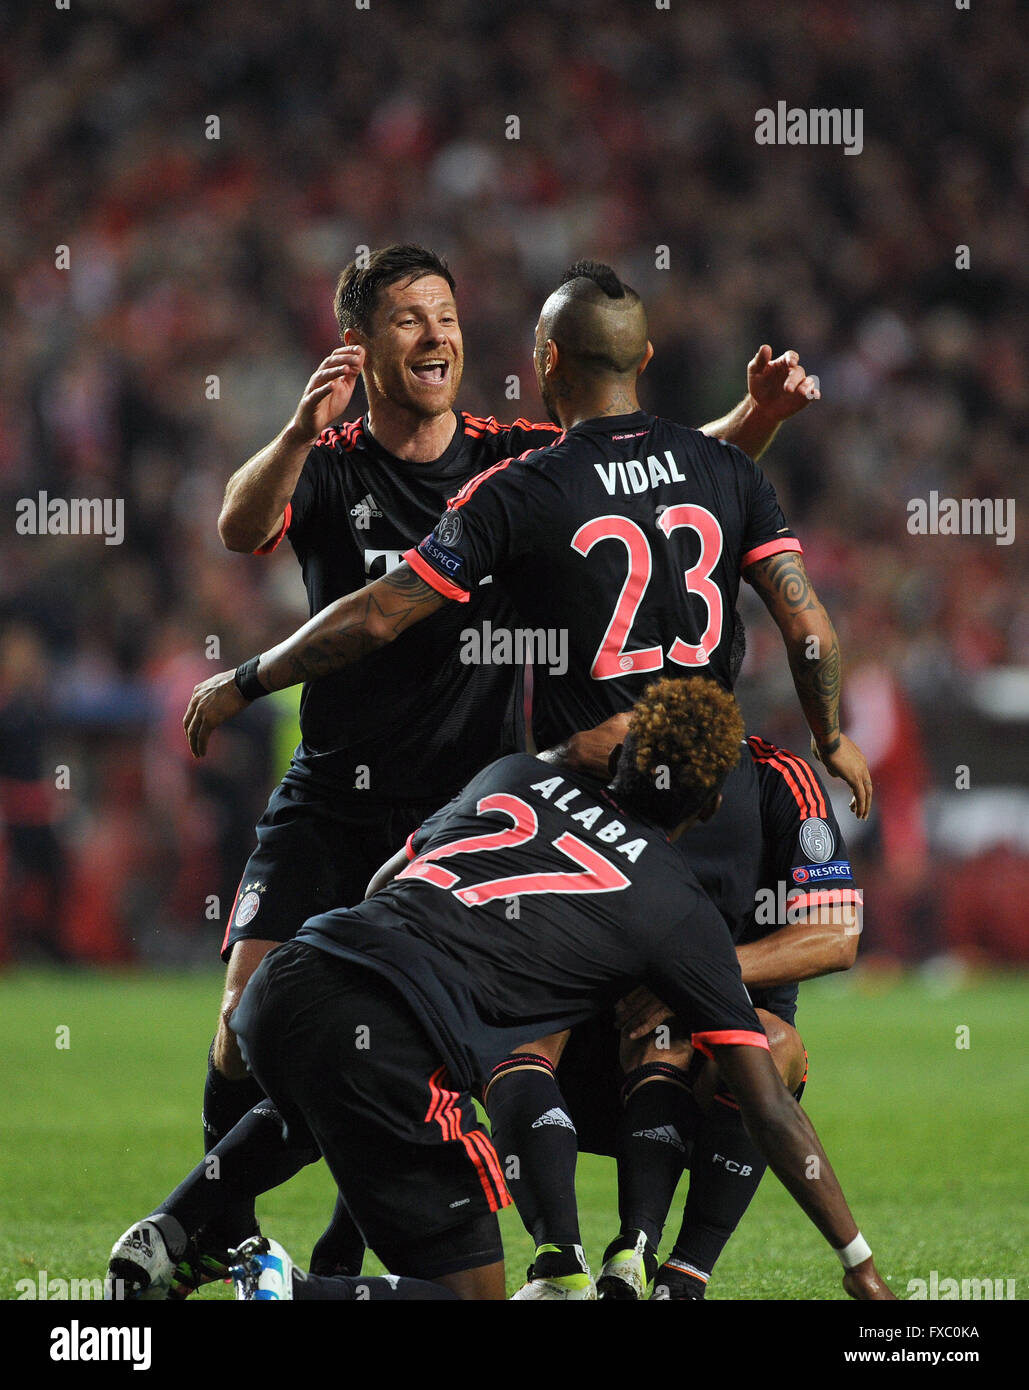 Munich's Arturo Vidal (top R) celebrates with teammate Xabi Alonso (L)  after scoring the equalizer goal during the UEFA Champions League quarterfinal second leg soccer match between SL Benfica and FC Bayern Munich at Estadio da Luz in Lisbon, Portugal, 13 April 2016. Photo: Paulo Duarte/dpa Stock Photo